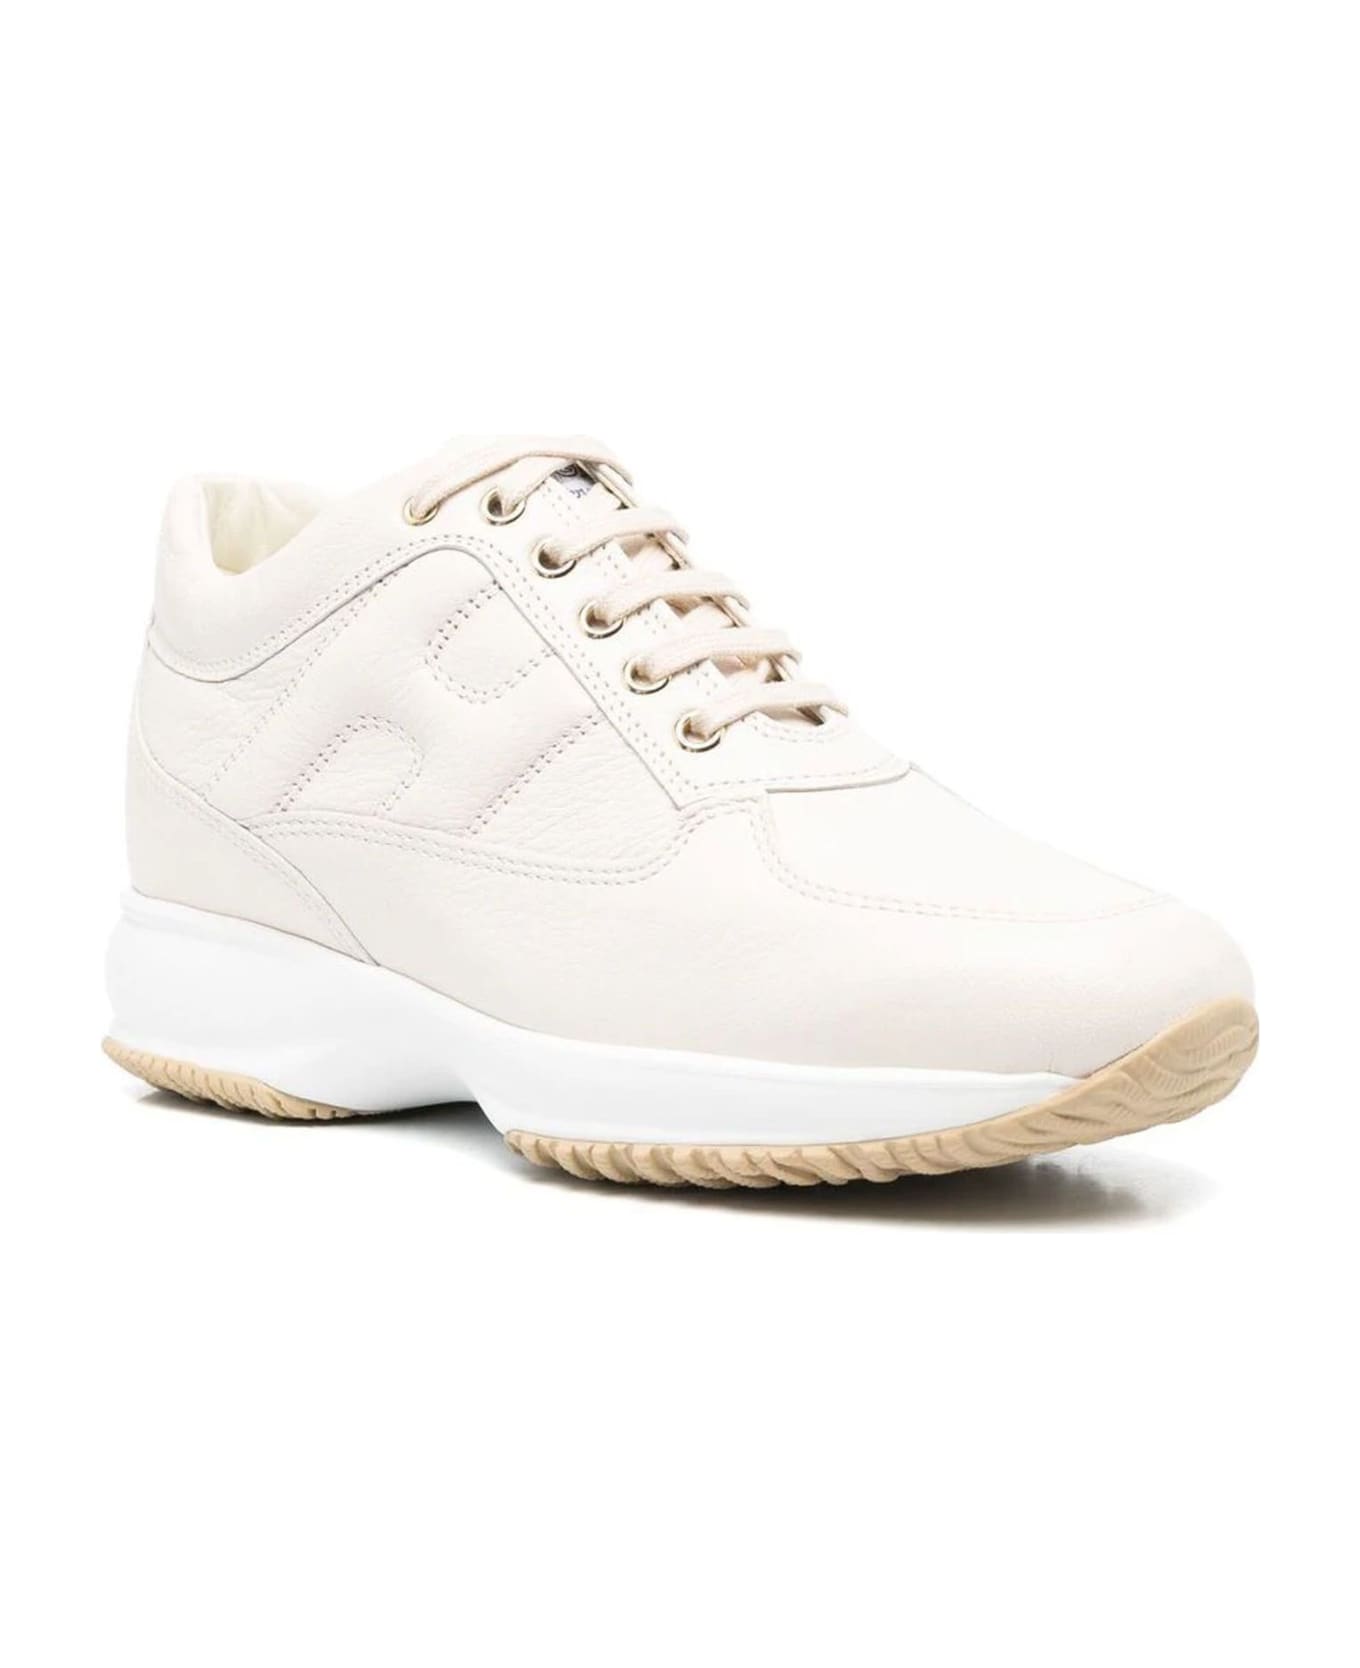 Hogan Interactive Lace-up Sneakers - White スニーカー